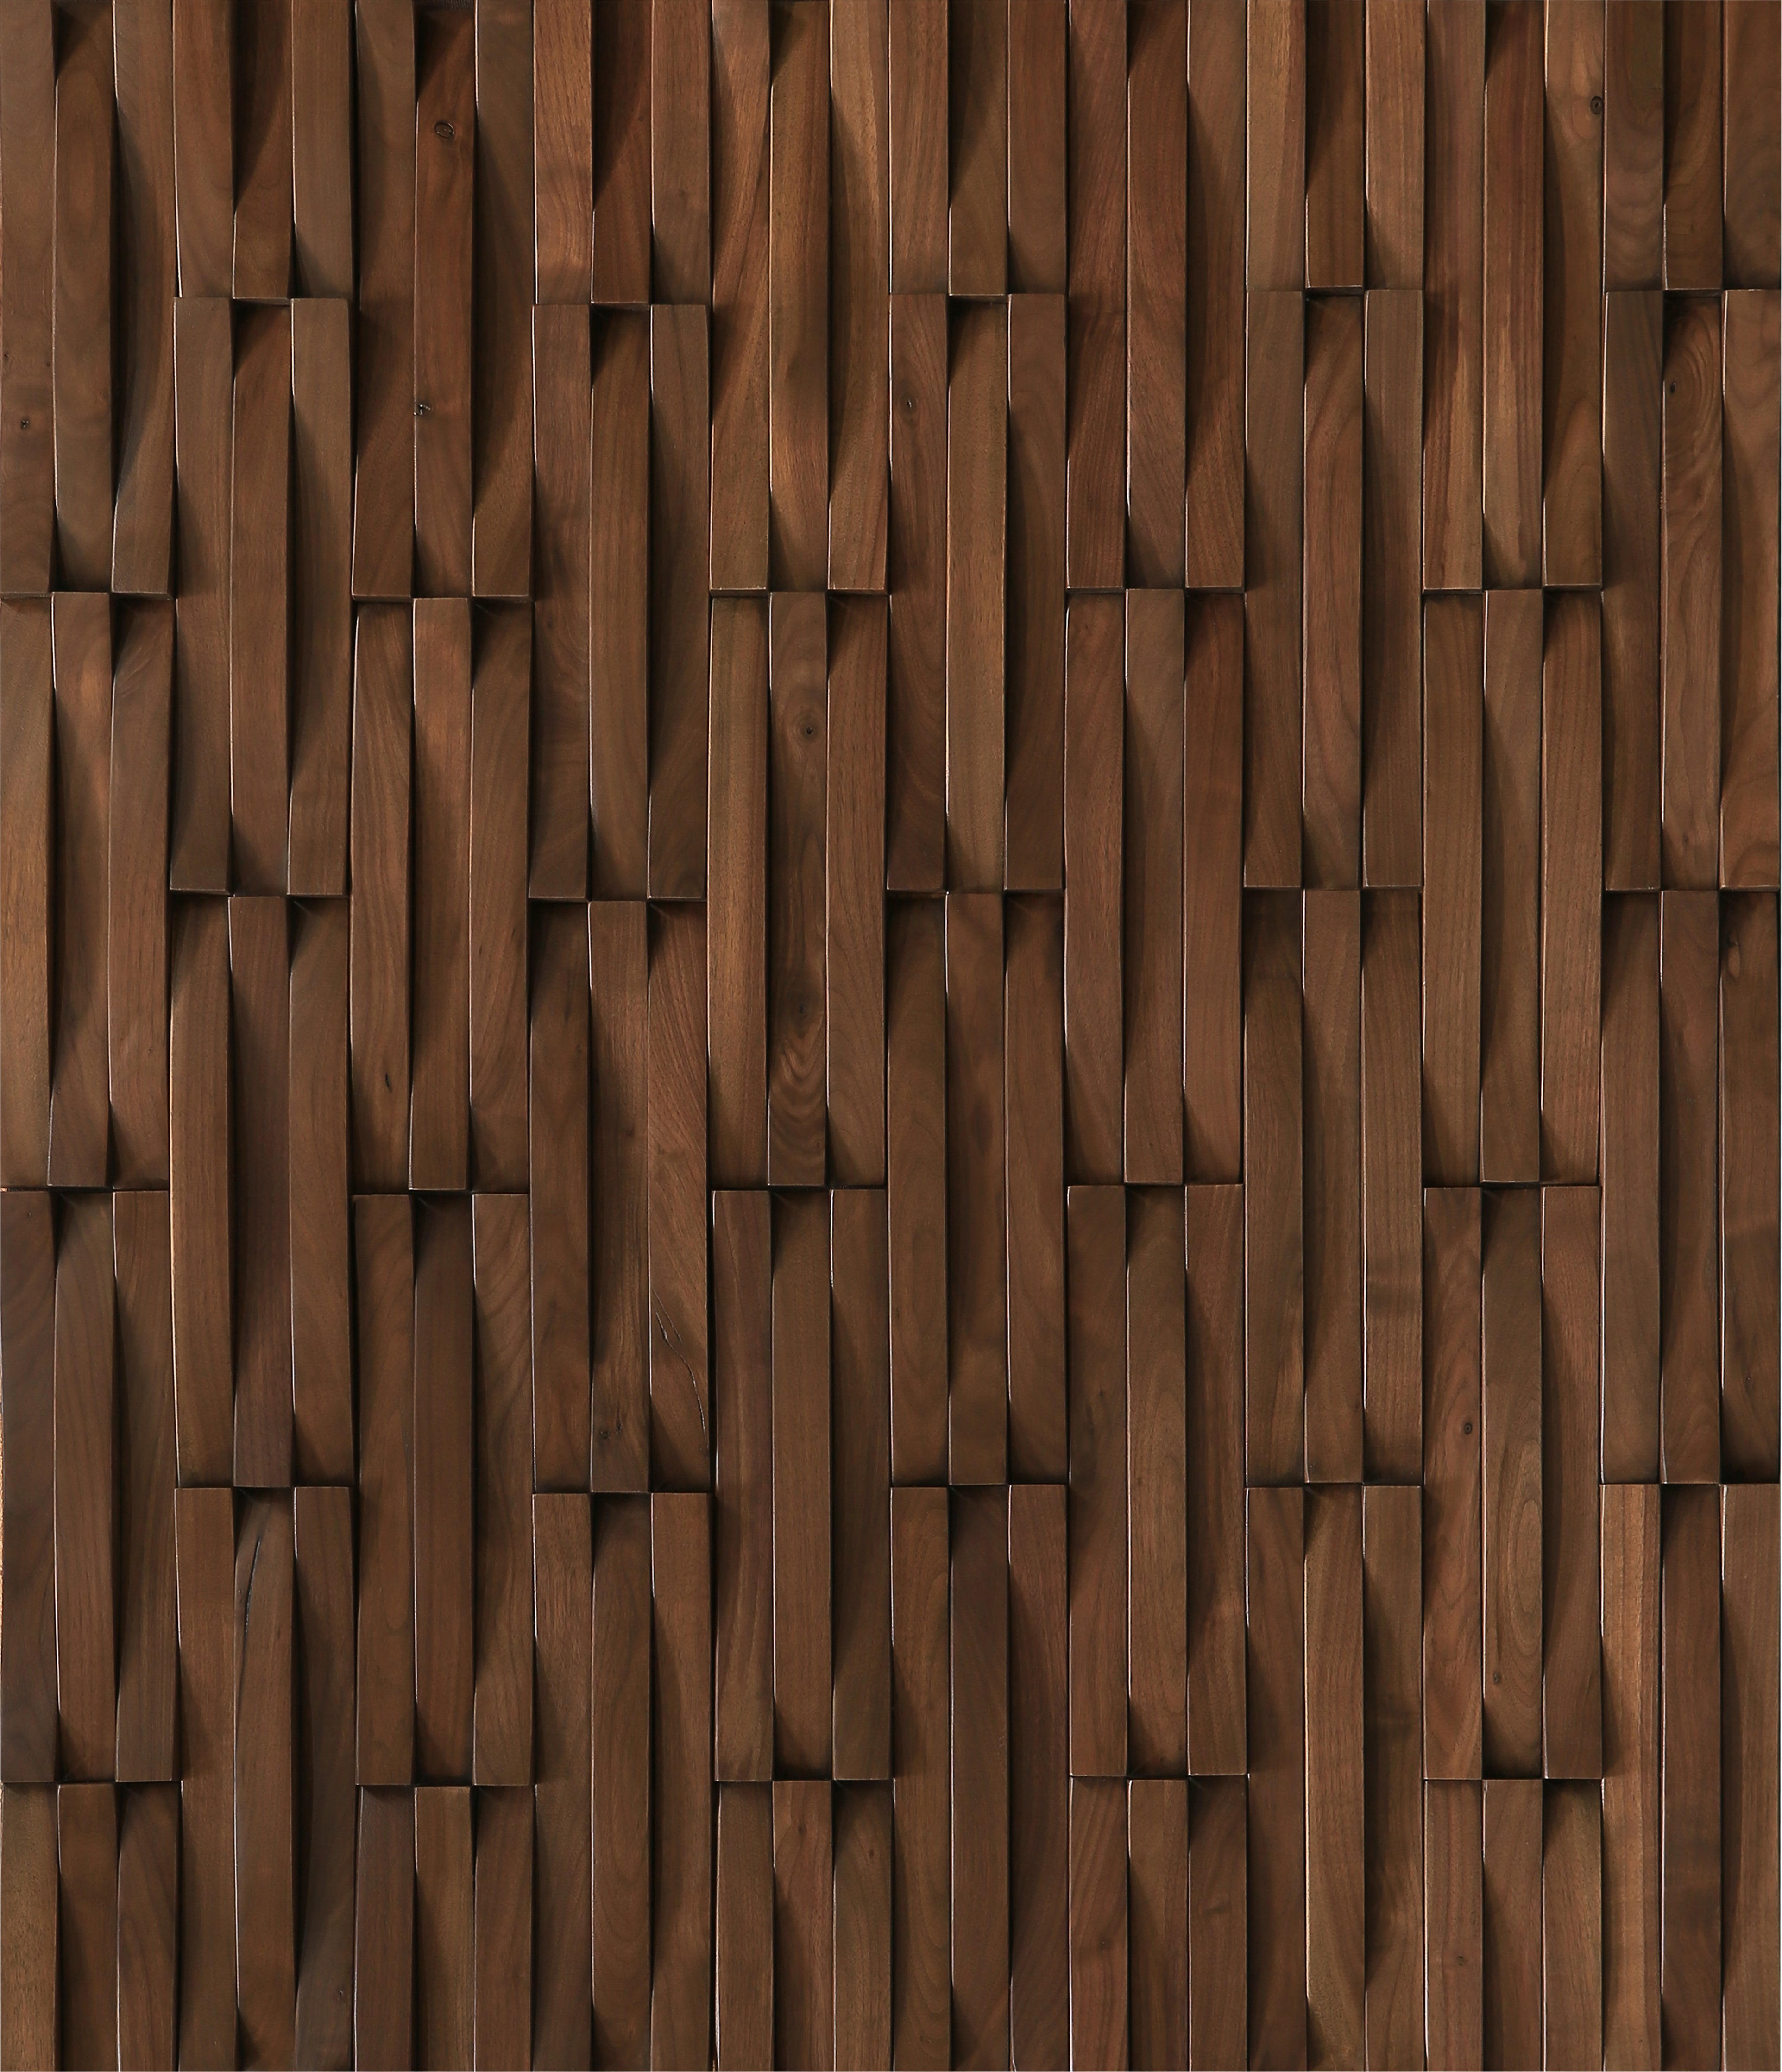 duchateau inceptiv krescent stout walnut three dimensional wall natural wood panel conversion varnish for interior use distributed by surface group international